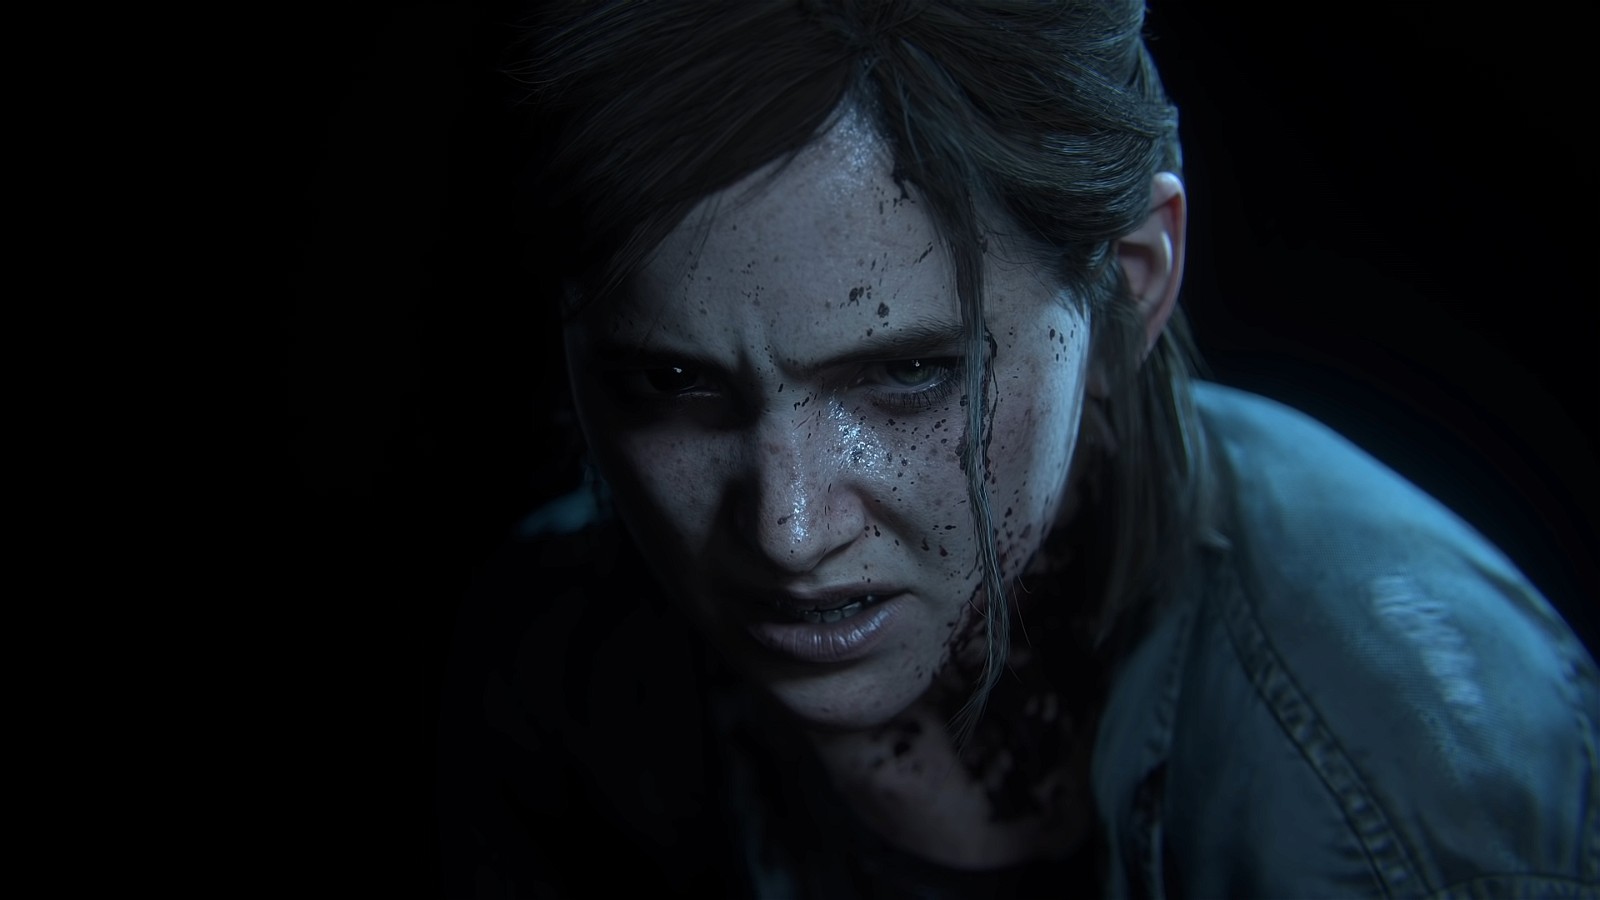 Ellie's destructive journey through Part 2 could put her loved ones in jeopardy in Part 3. Image credit: Naughty Dog